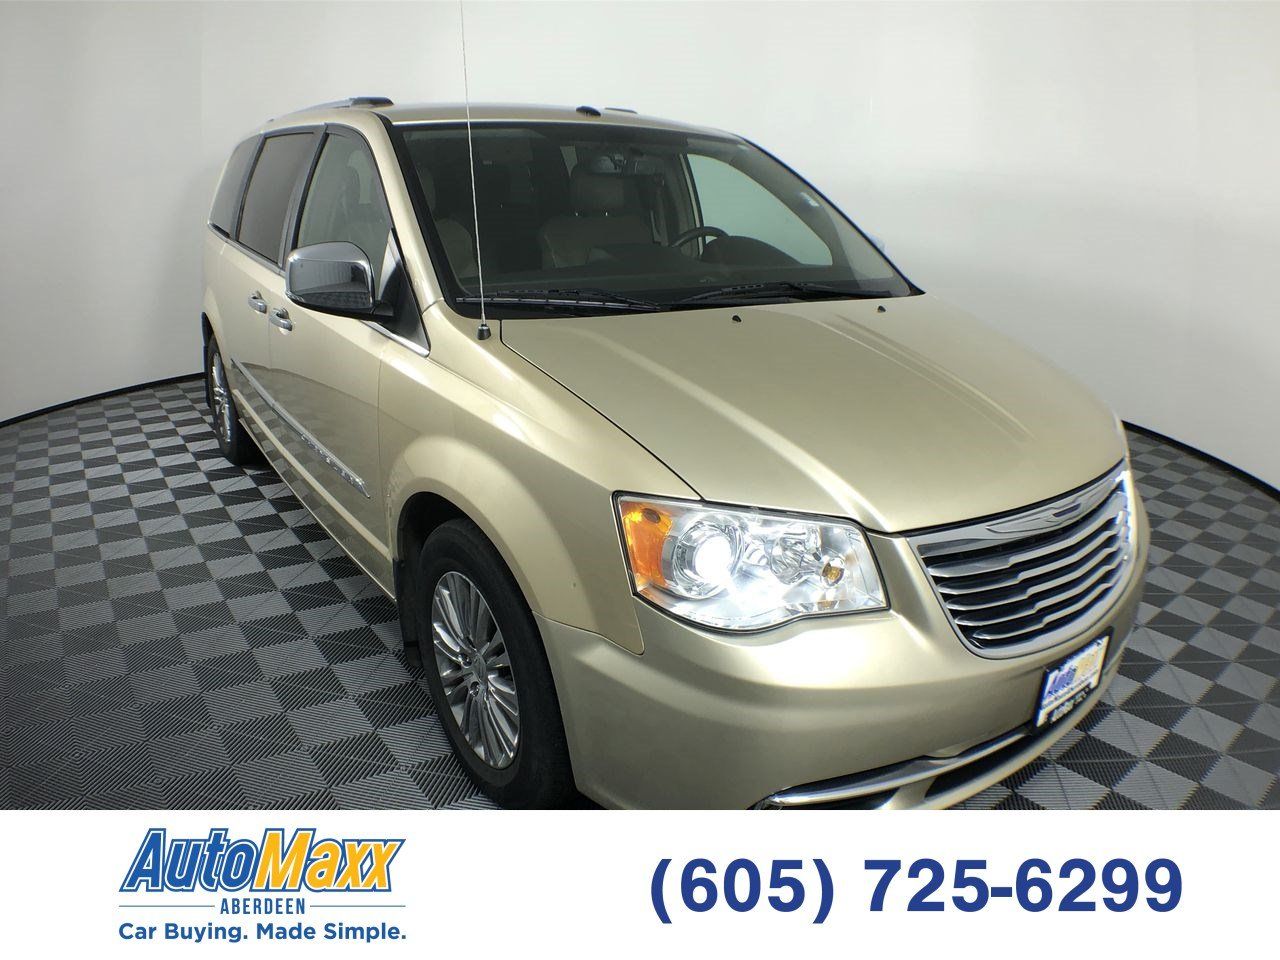  Chrysler Town & Country Limited